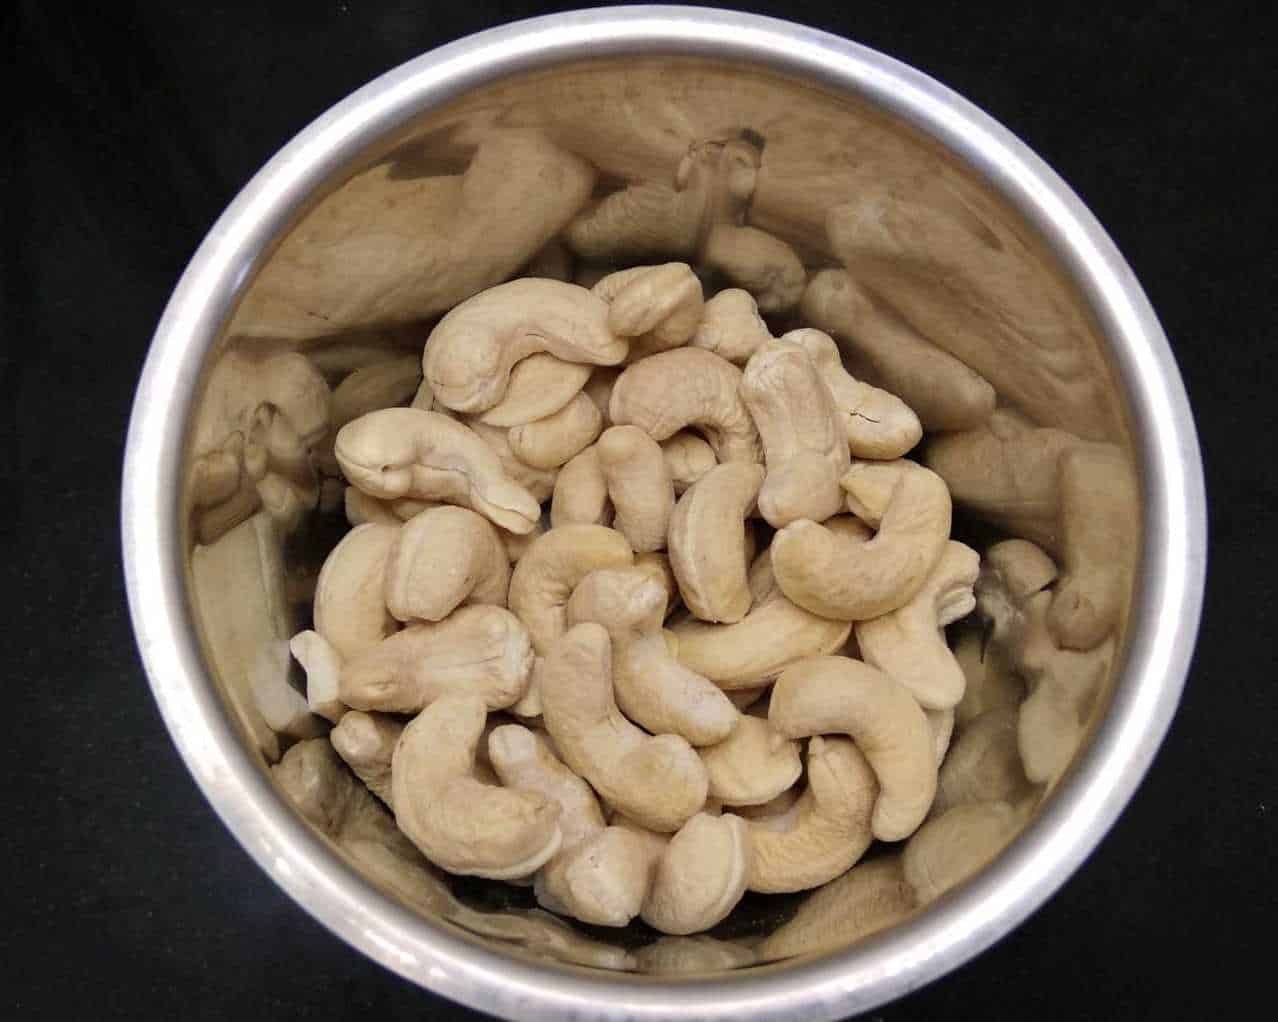 How to make almond and cashew powder